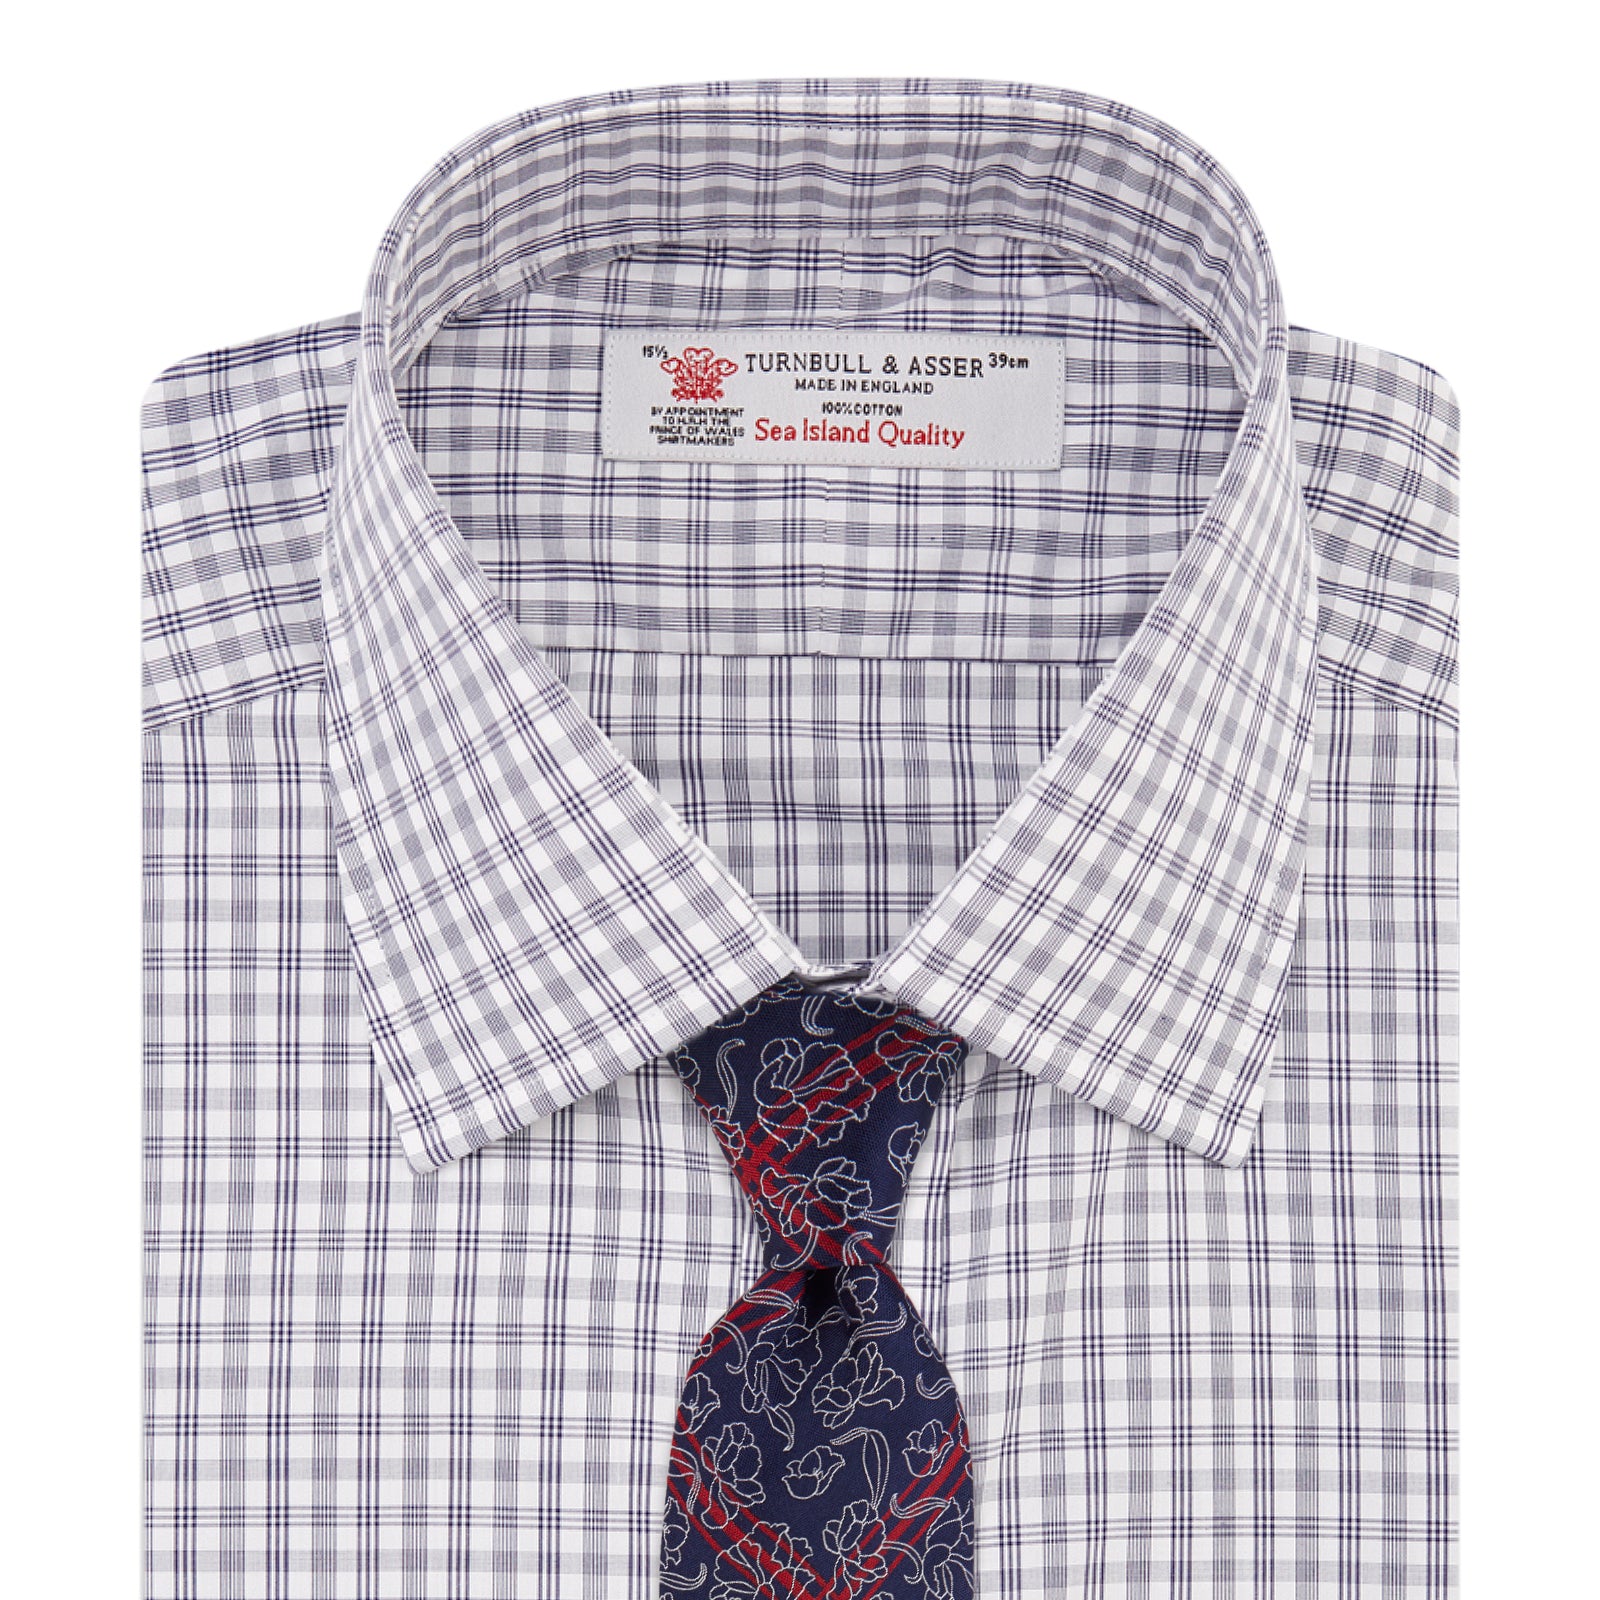 Navy and White Multi Check Sea Island Quality Cotton Shirt with Classic T&A Collar